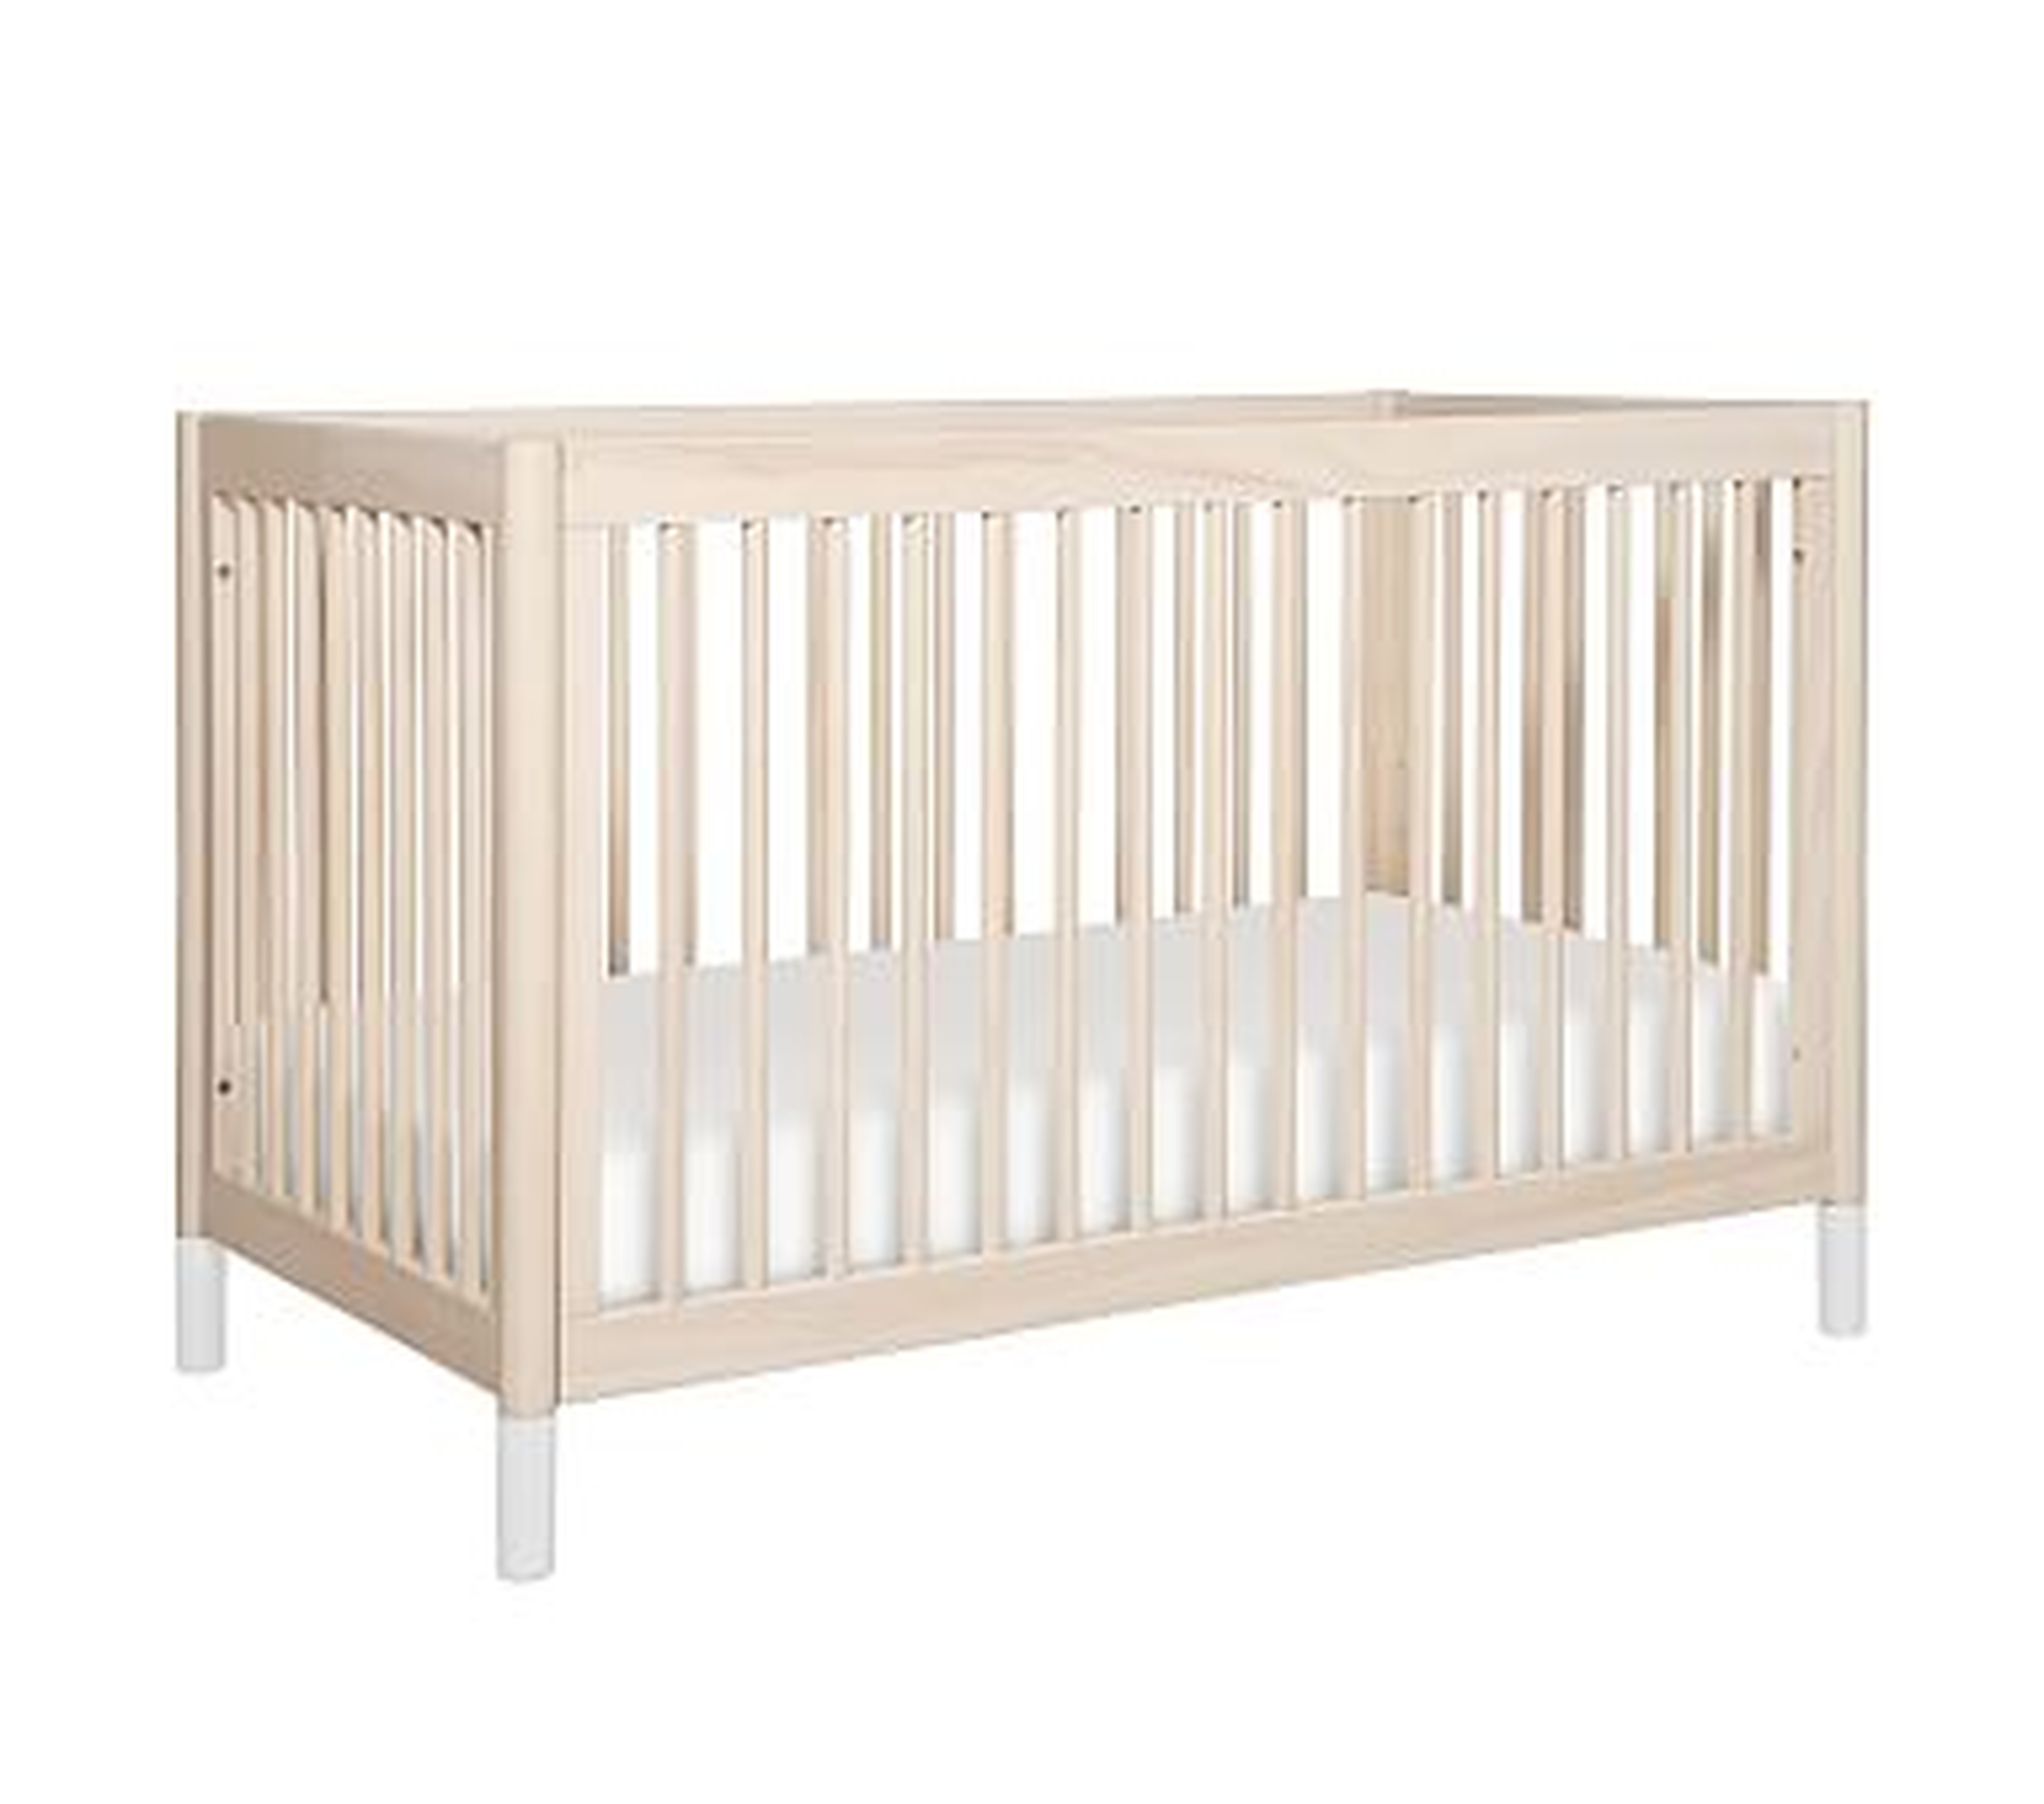 Babyletto Gelato 4-in-1 Convertible Crib, UPS, Washed Natural/White - Pottery Barn Kids